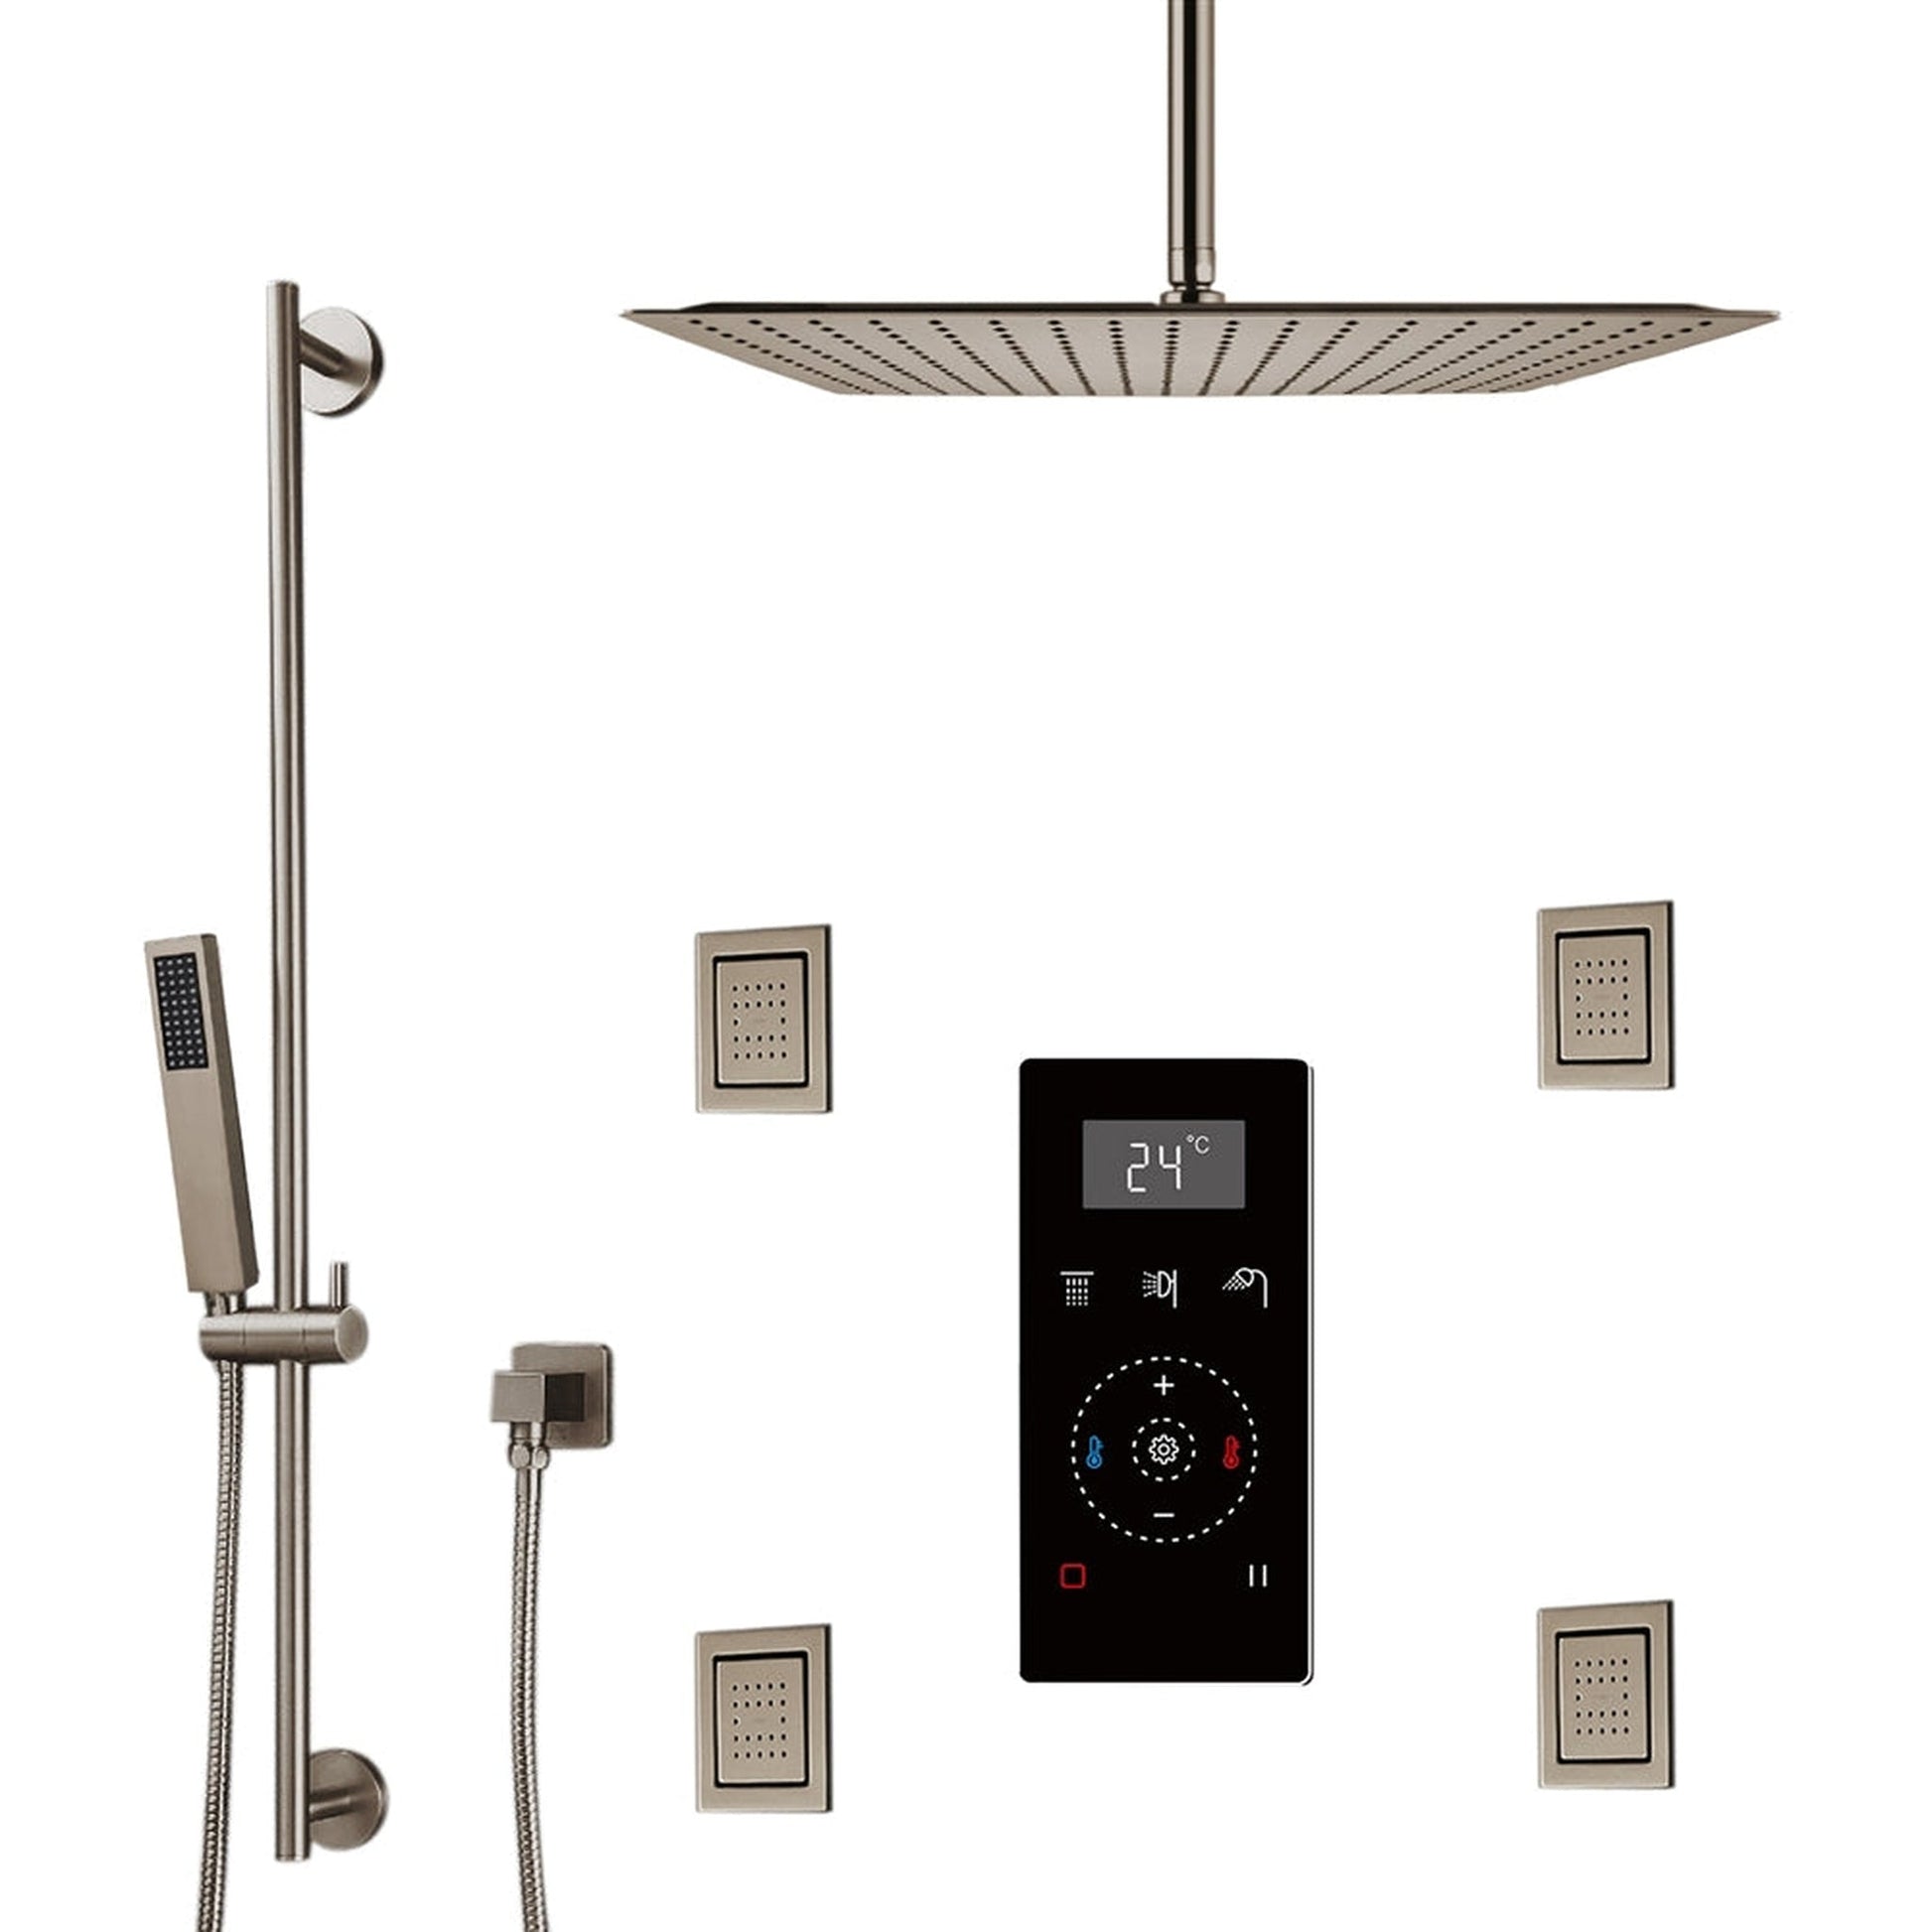 Fontana 24" Brushed Nickel Ceiling Mounted Rainfall Digital Control Shower System With 4-Jet Body Sprays, Hand Shower and Without Water Powered LED Lights